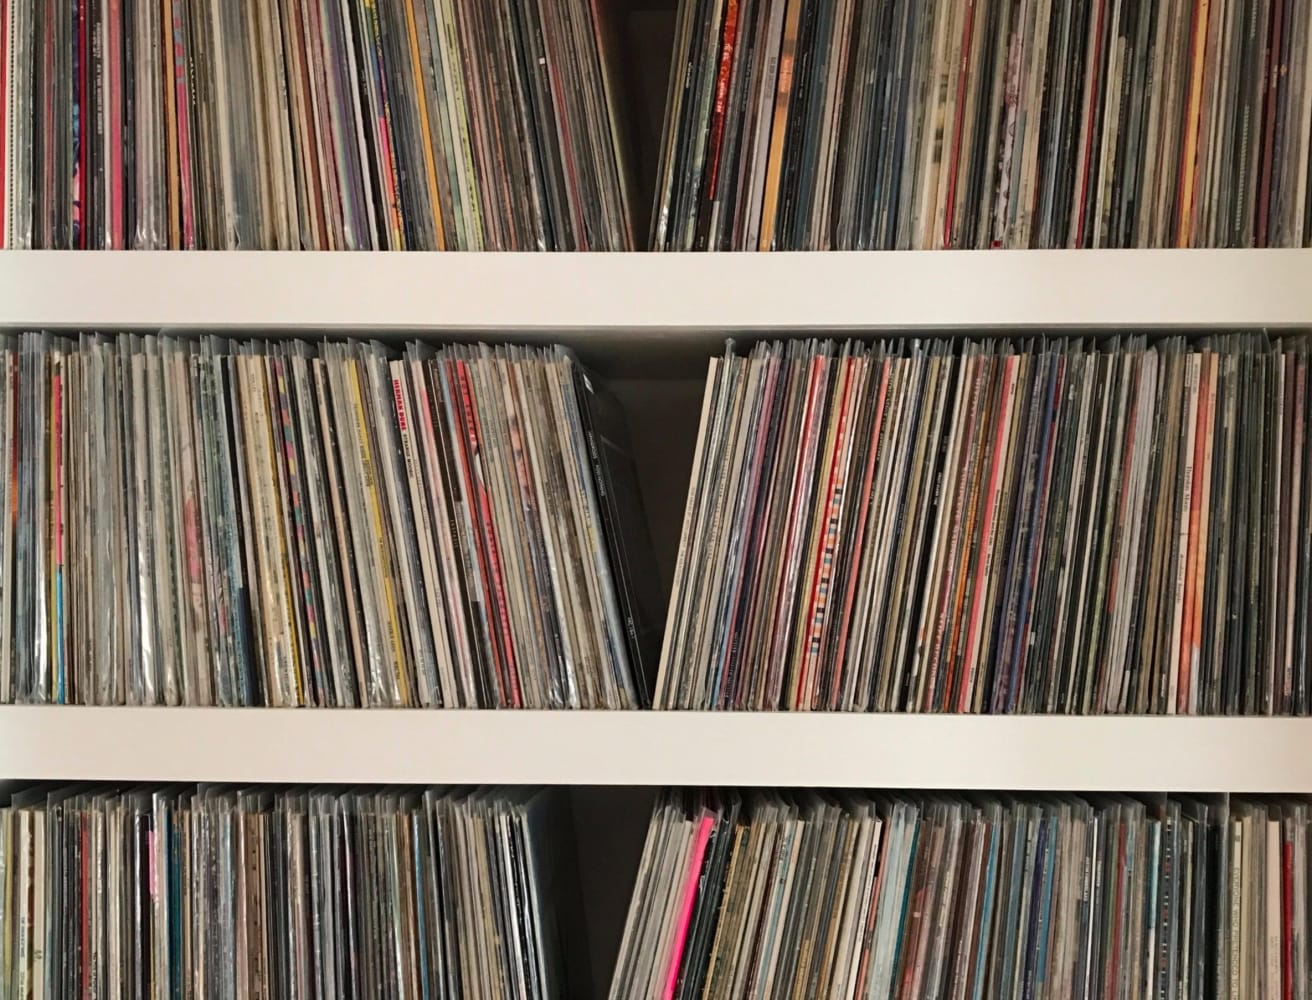 Vinyl collections from around the world: The top 5